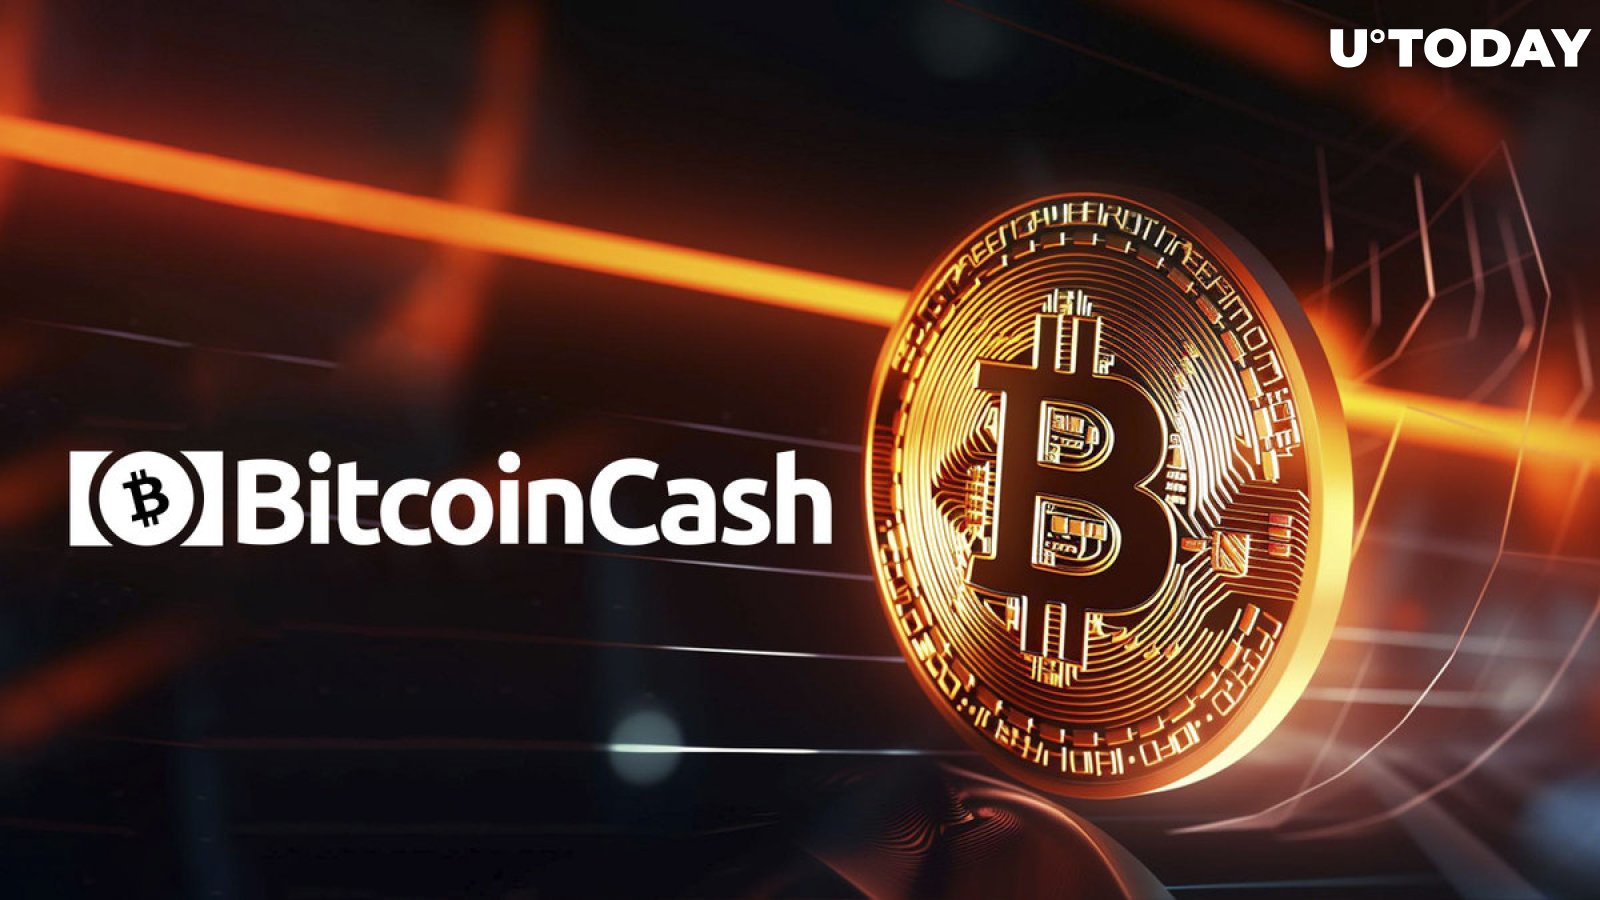 Bitcoin (BTC) and Bitcoin Cash (BCH) Prepare for Epic Halving Countdown Event